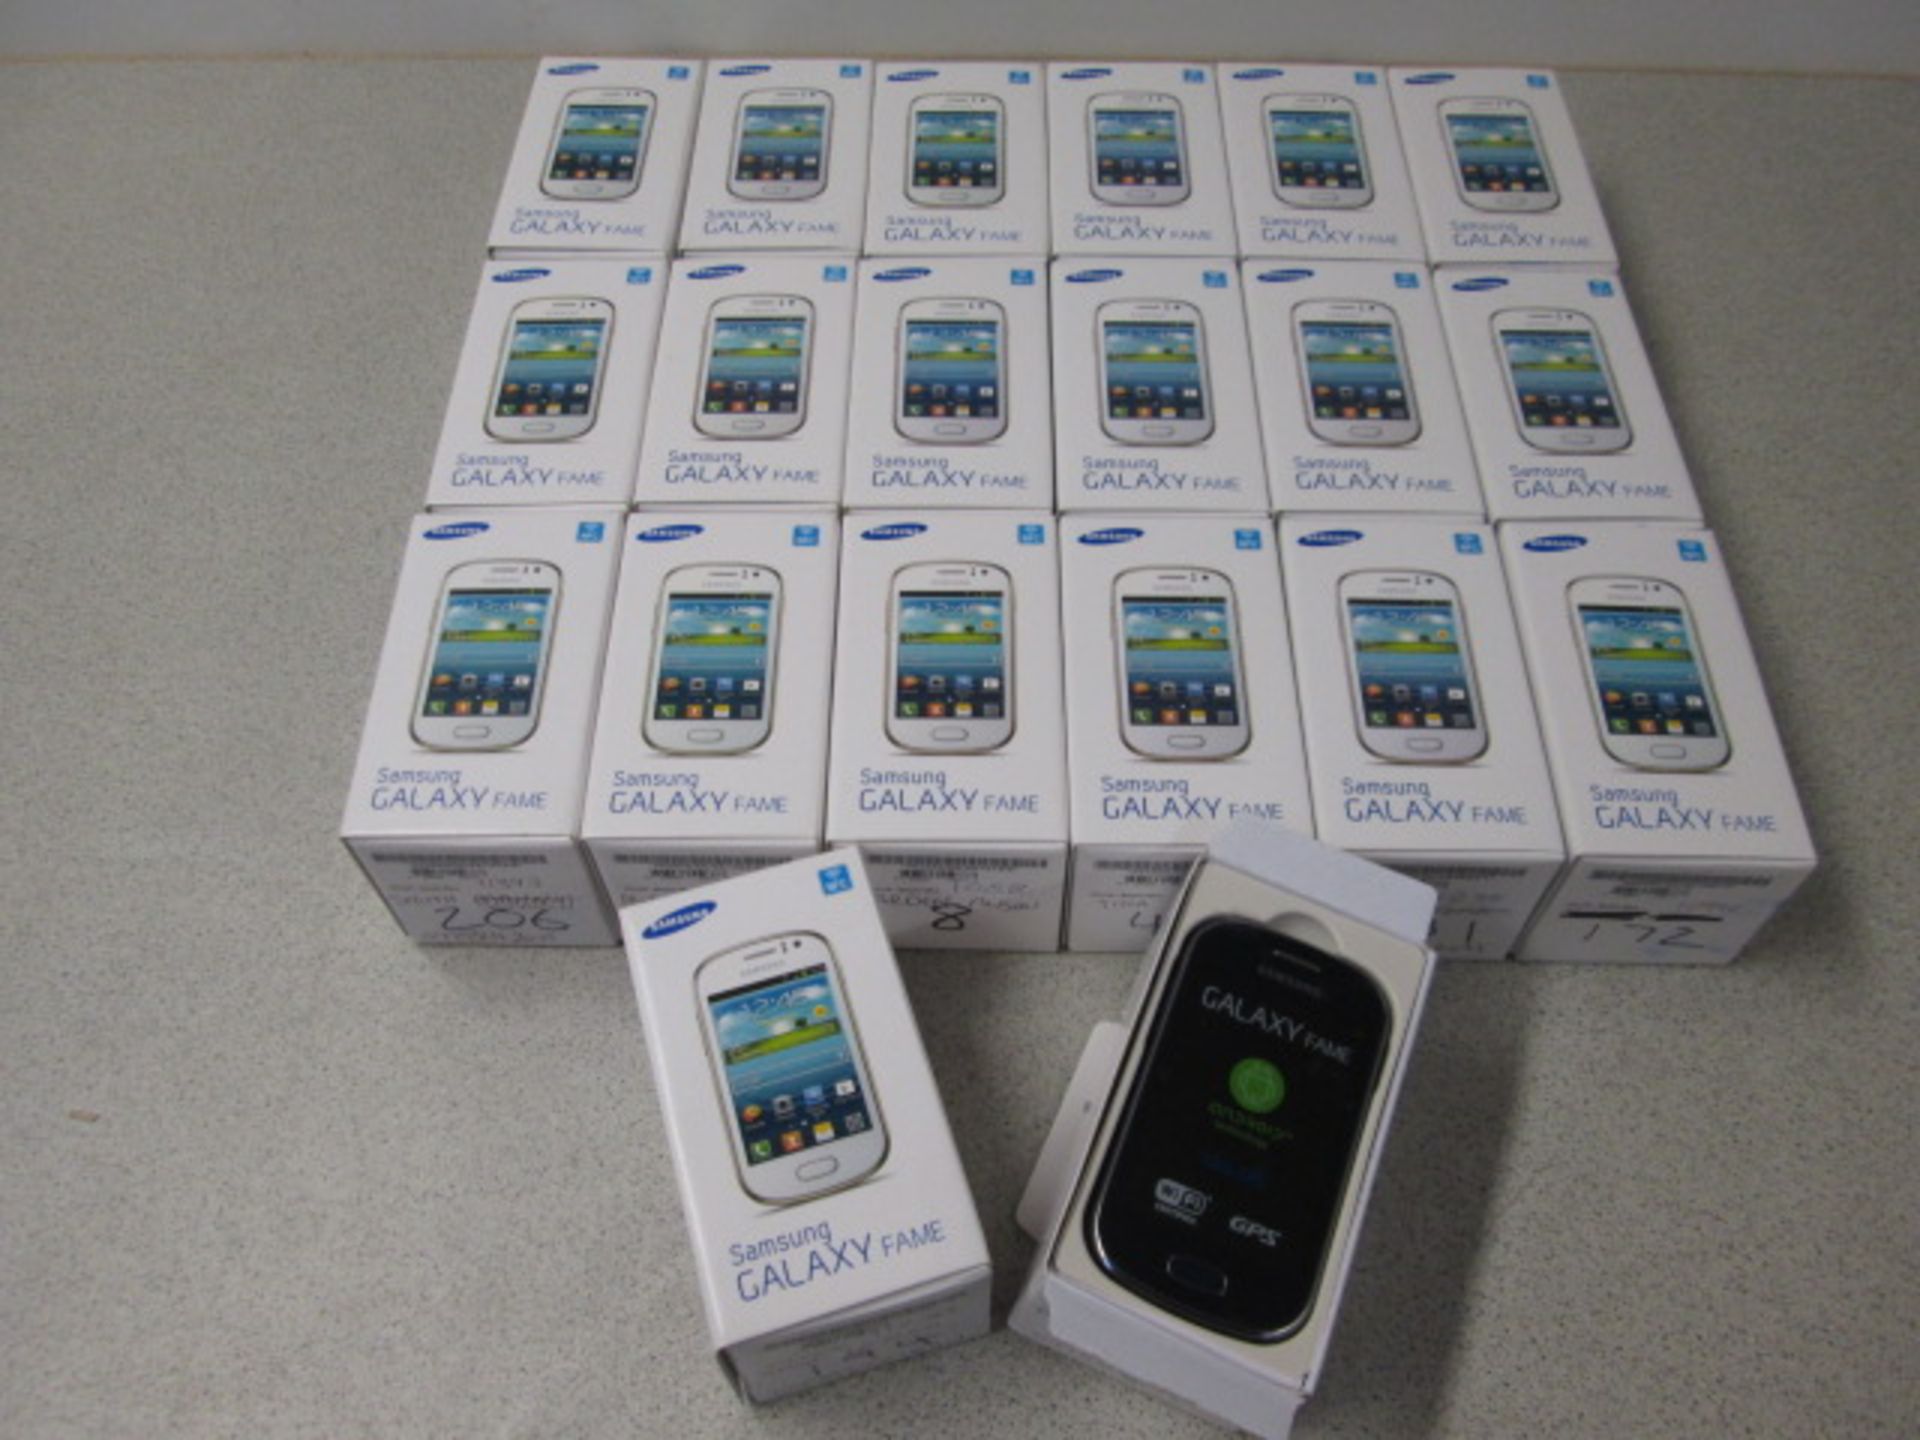 10 x Samsung Galaxy Fame, Model GT-S6810P, Mobile Phones.